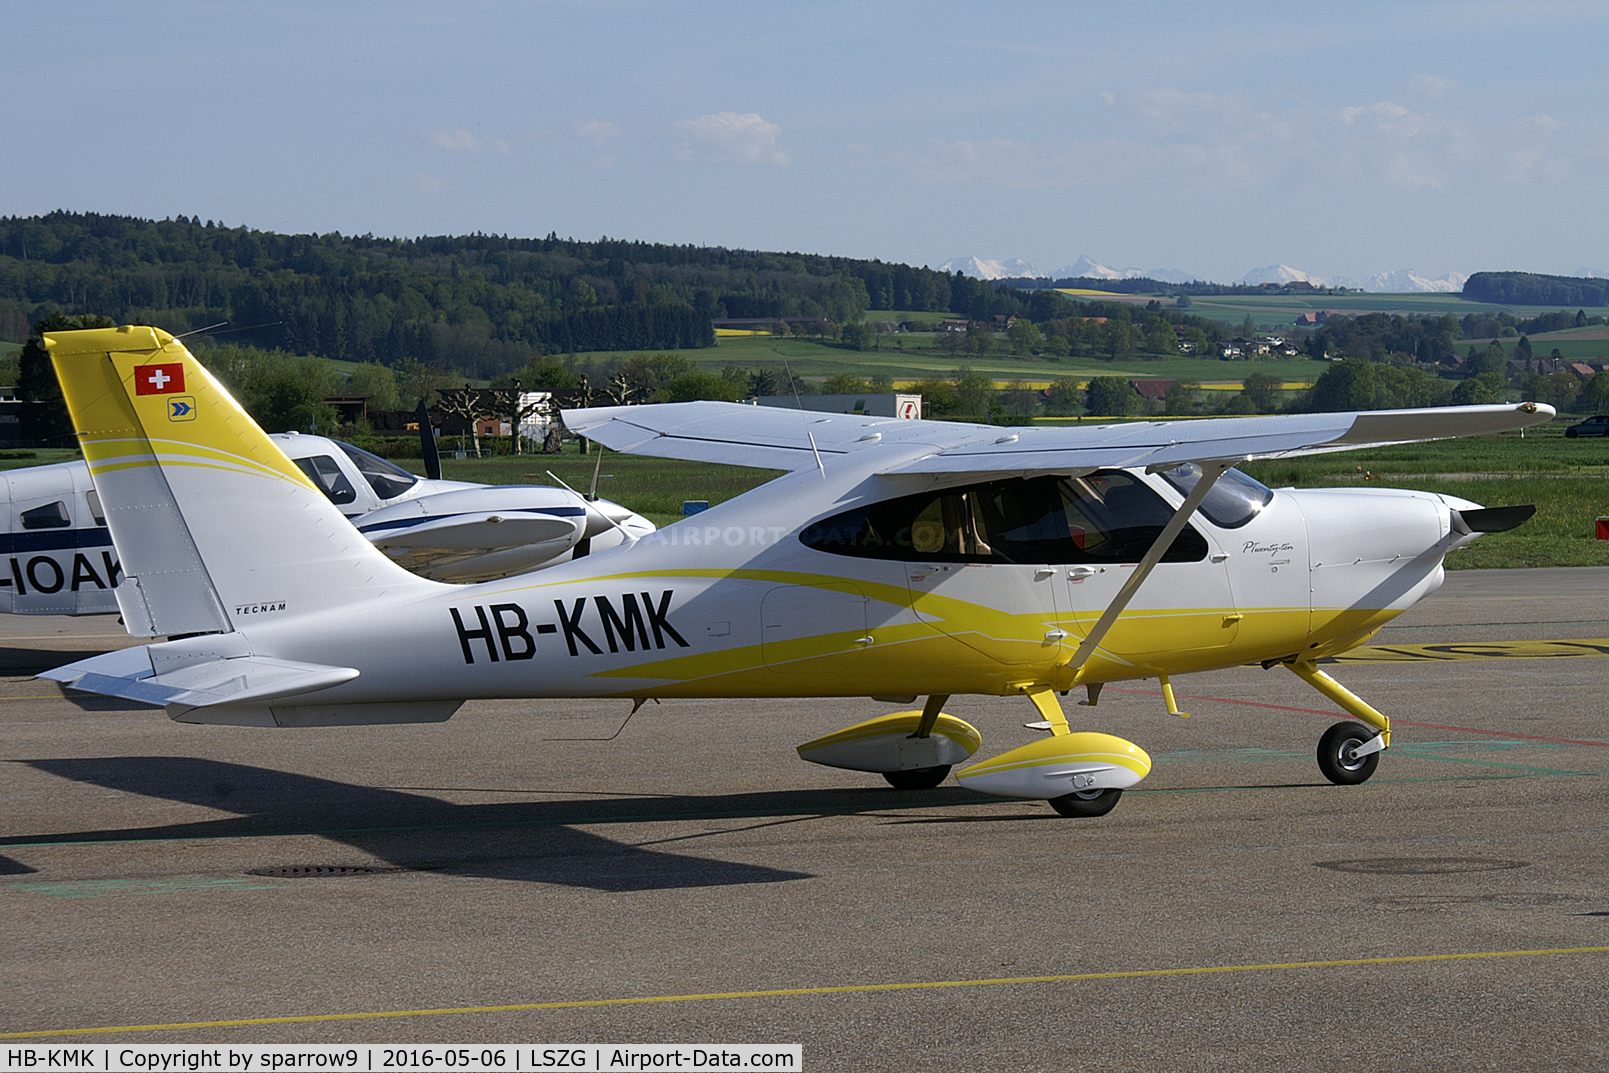 HB-KMK, 2015 Tecnam P-2010 C/N 029, A new visitor at Grenchen